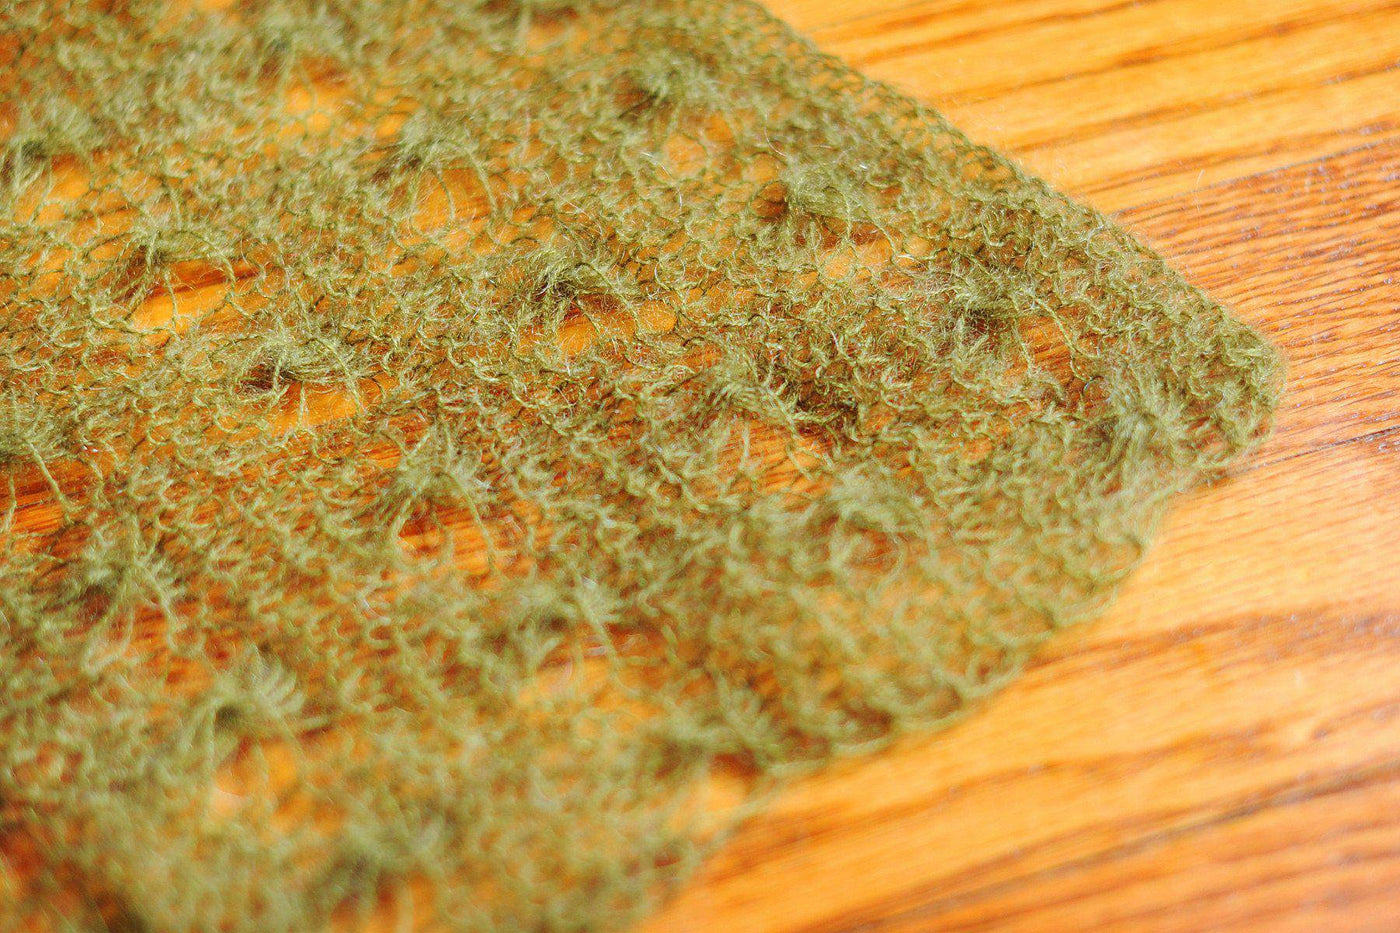 Olive Green Sunflower Mohair Knit Baby Wrap - Beautiful Photo Props